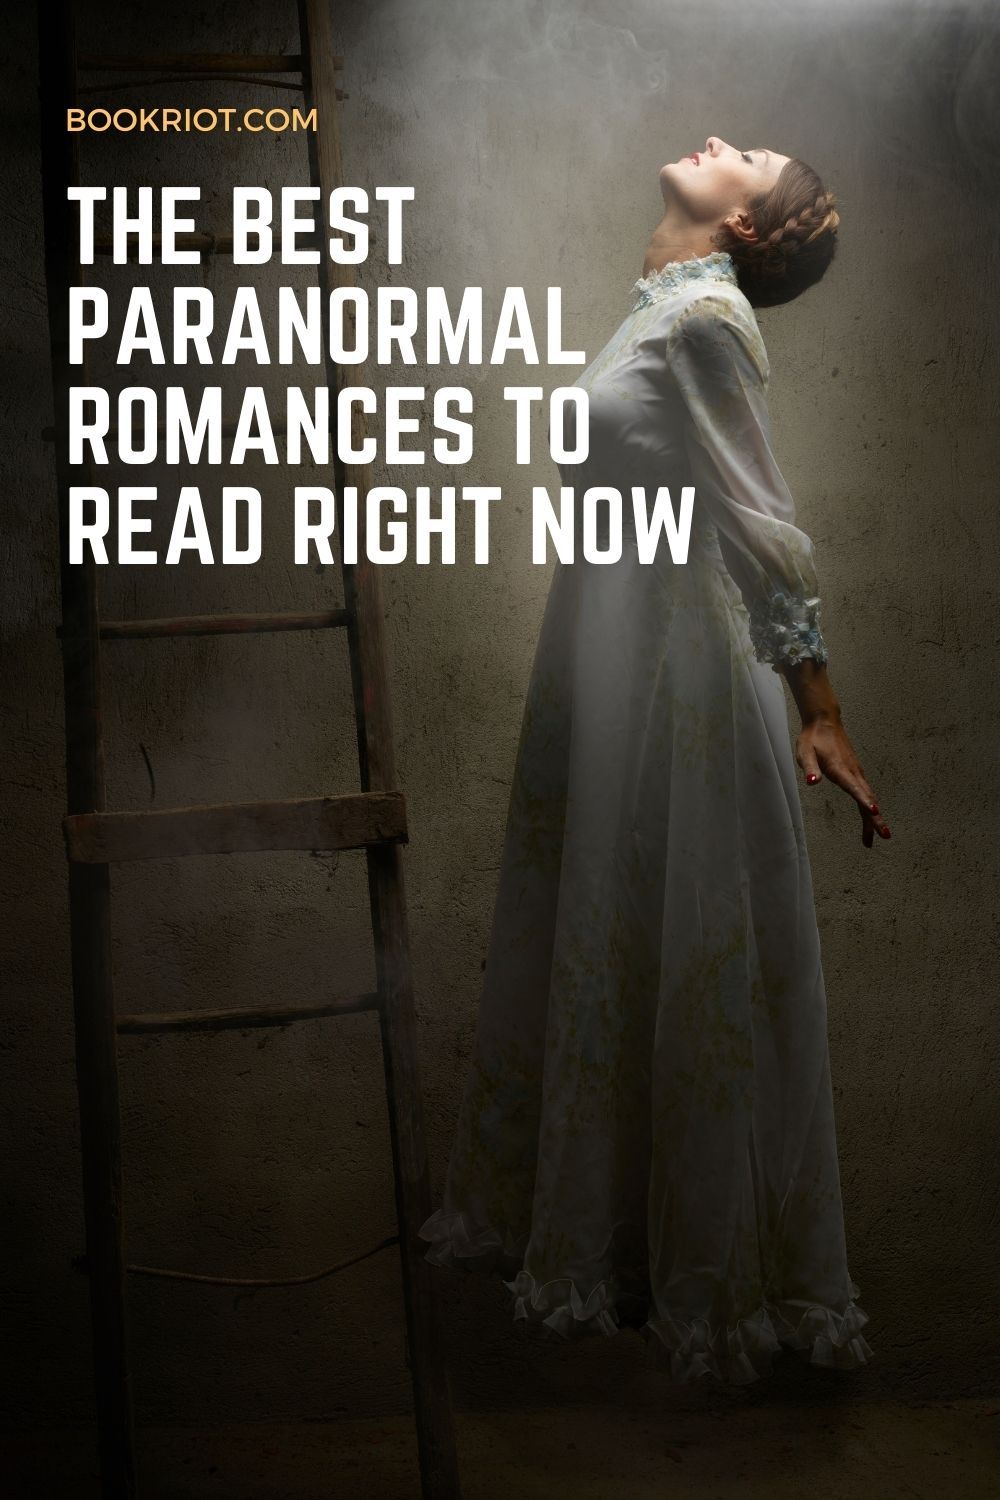 The Best Paranormal Romances to Read Right Now Book Riot